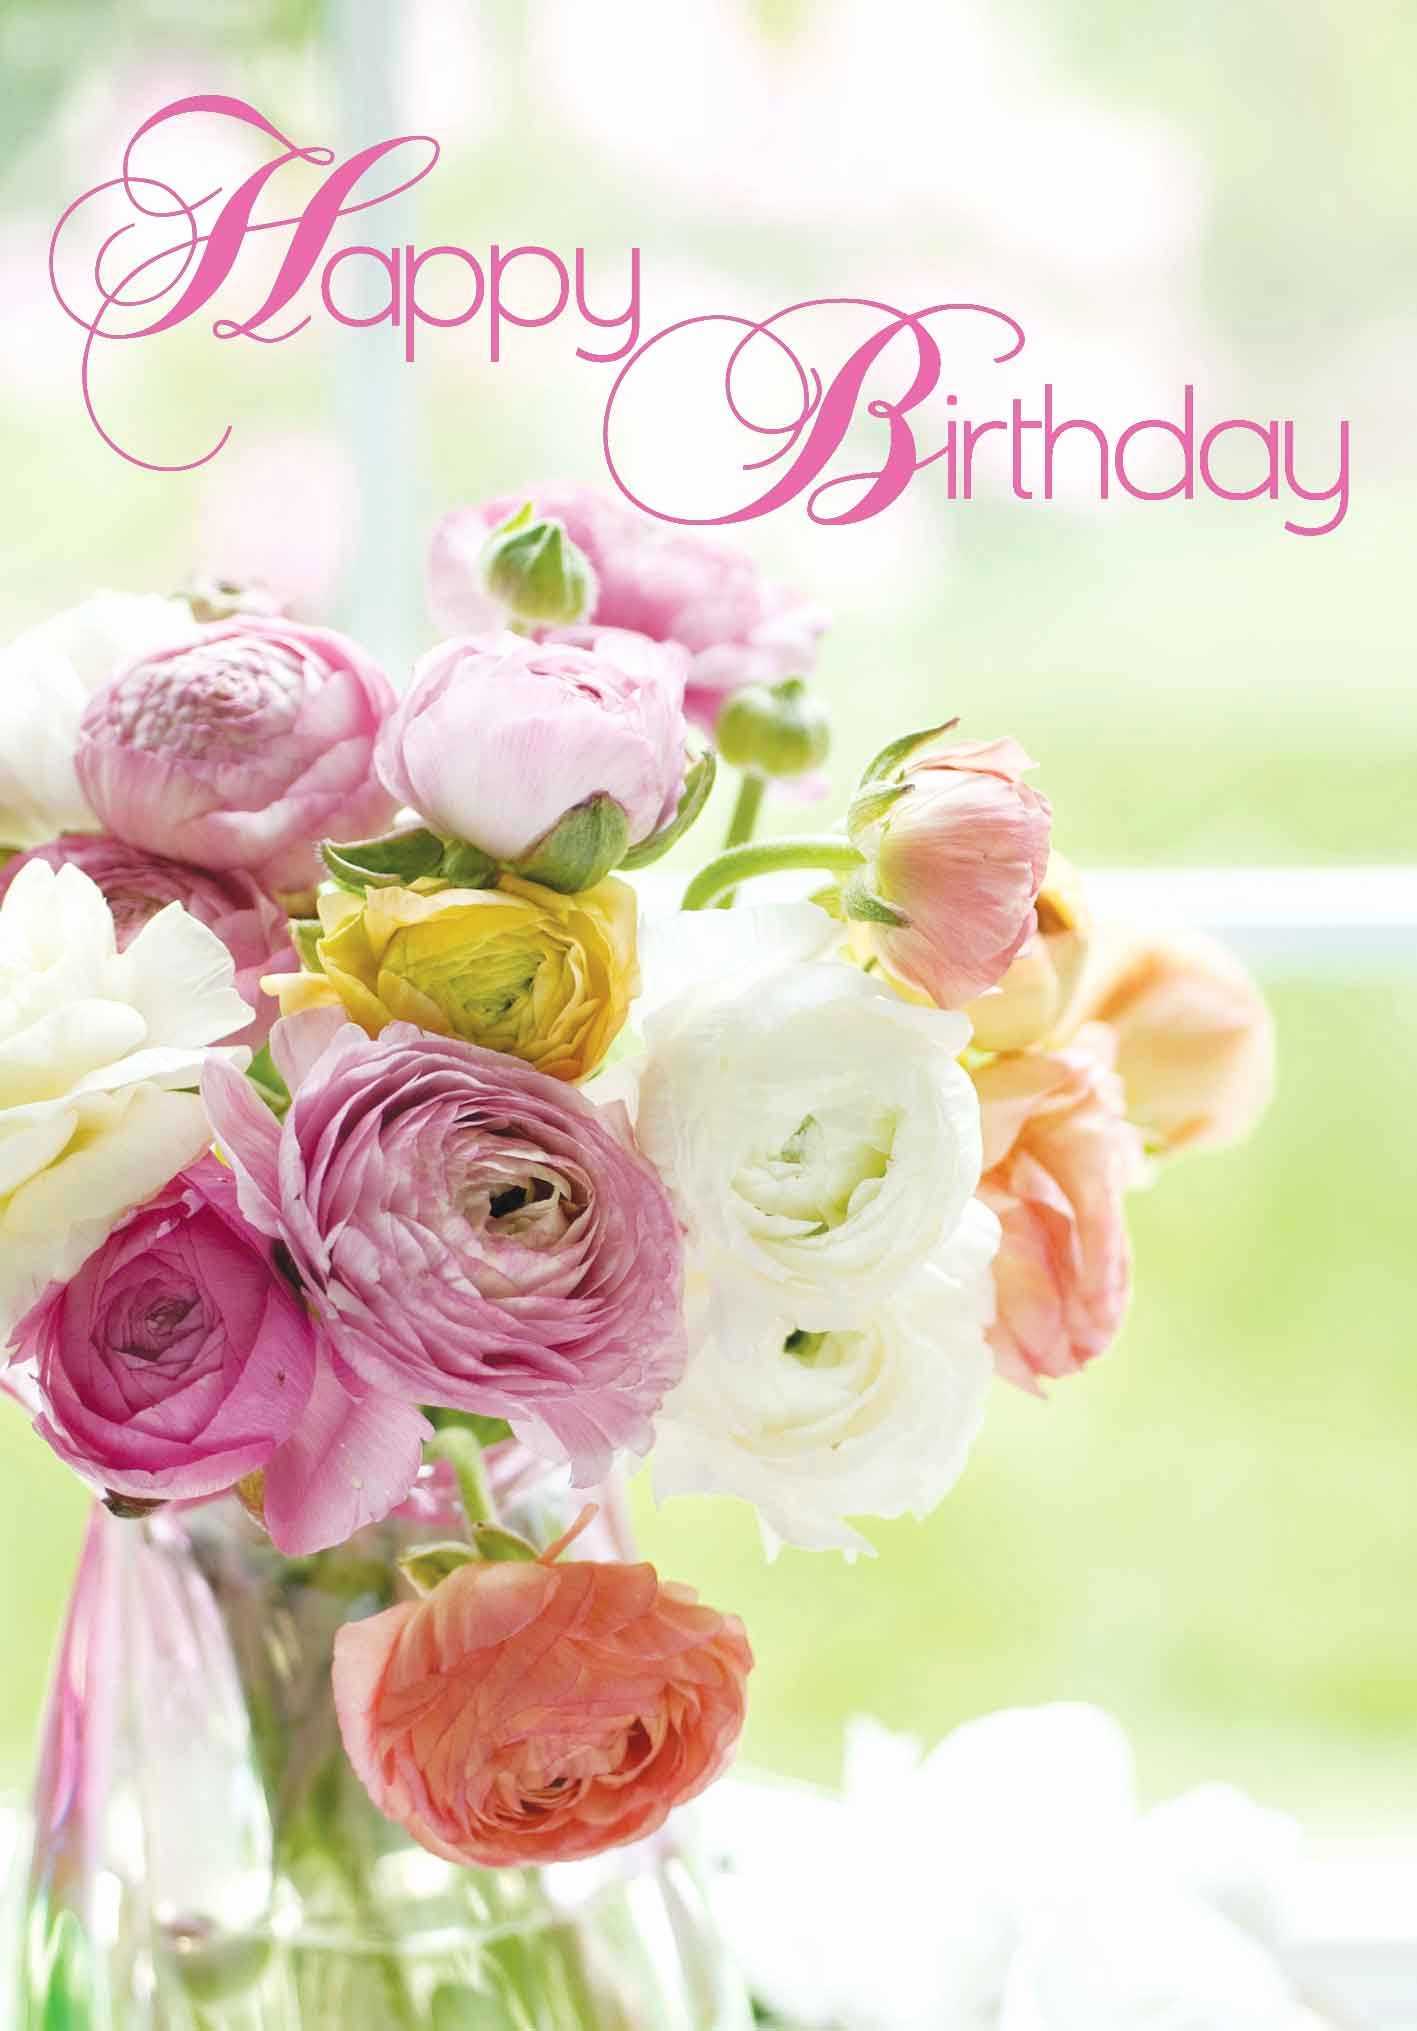 11 Fresh Happy Birthday Bouquet Images Pics FREE TEMPLATE DESIGN. 